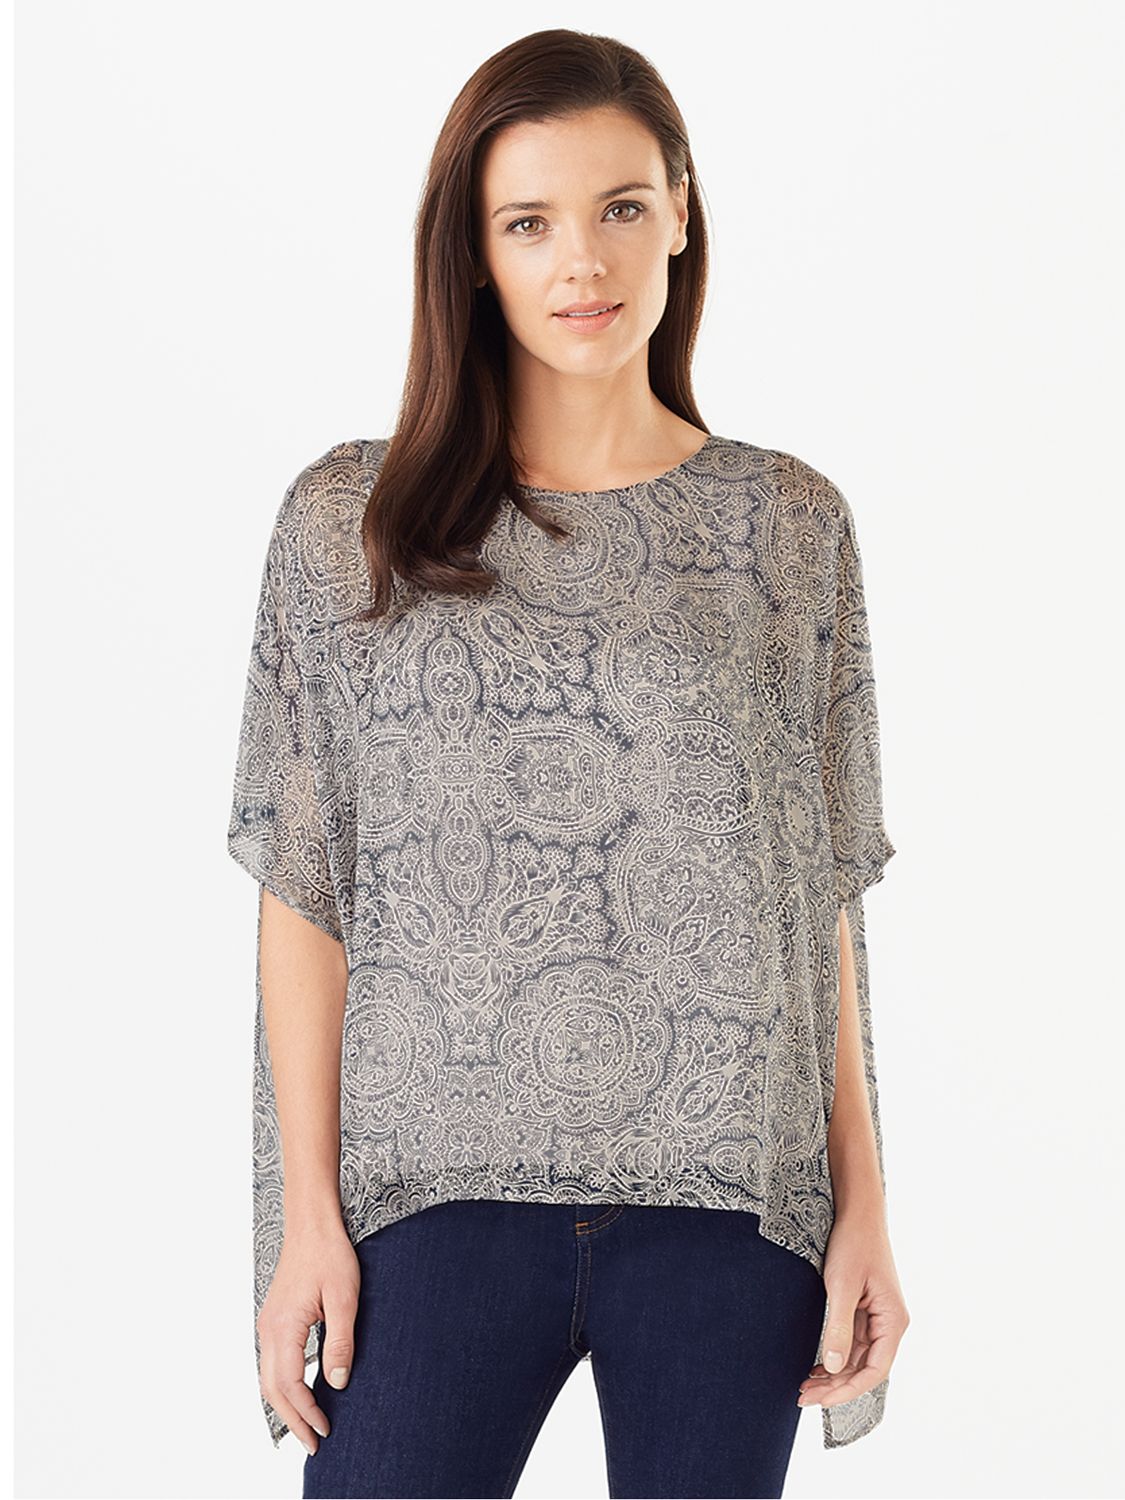 Phase Eight Natalie Paisley Print Blouse, Navy/Nude